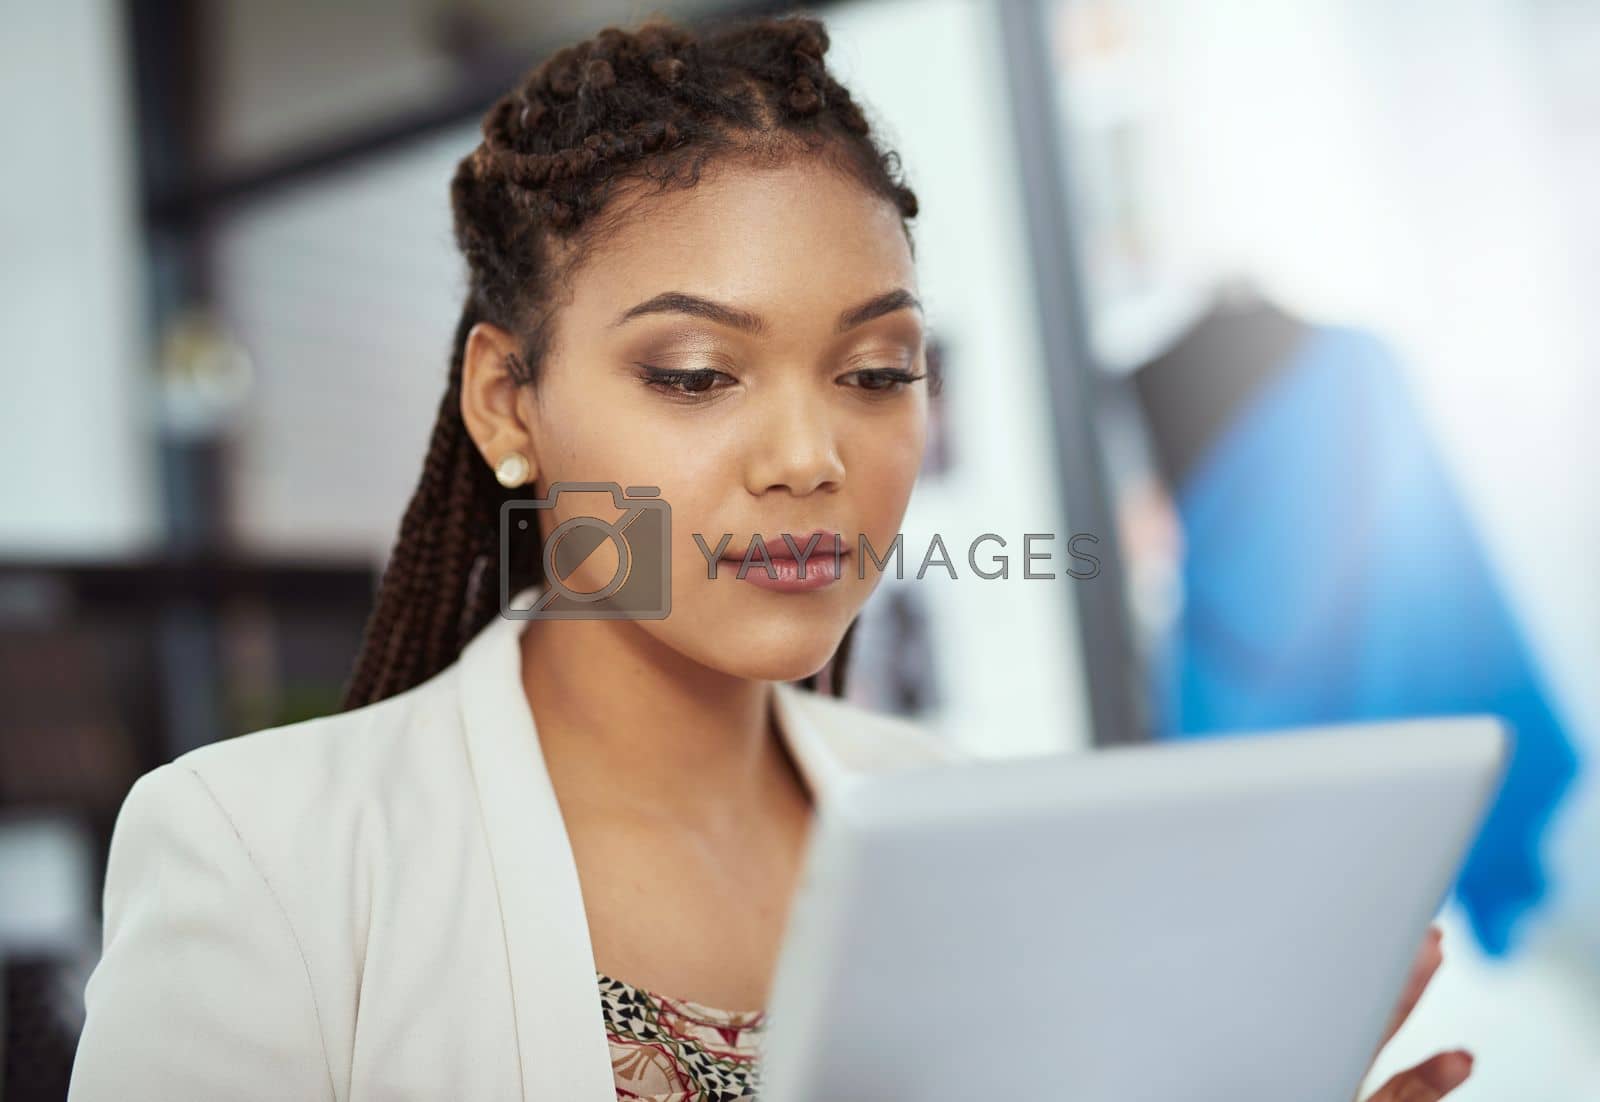 Royalty free image of Focused on fashion design. a young fashion designer working on her tablet. by YuriArcurs